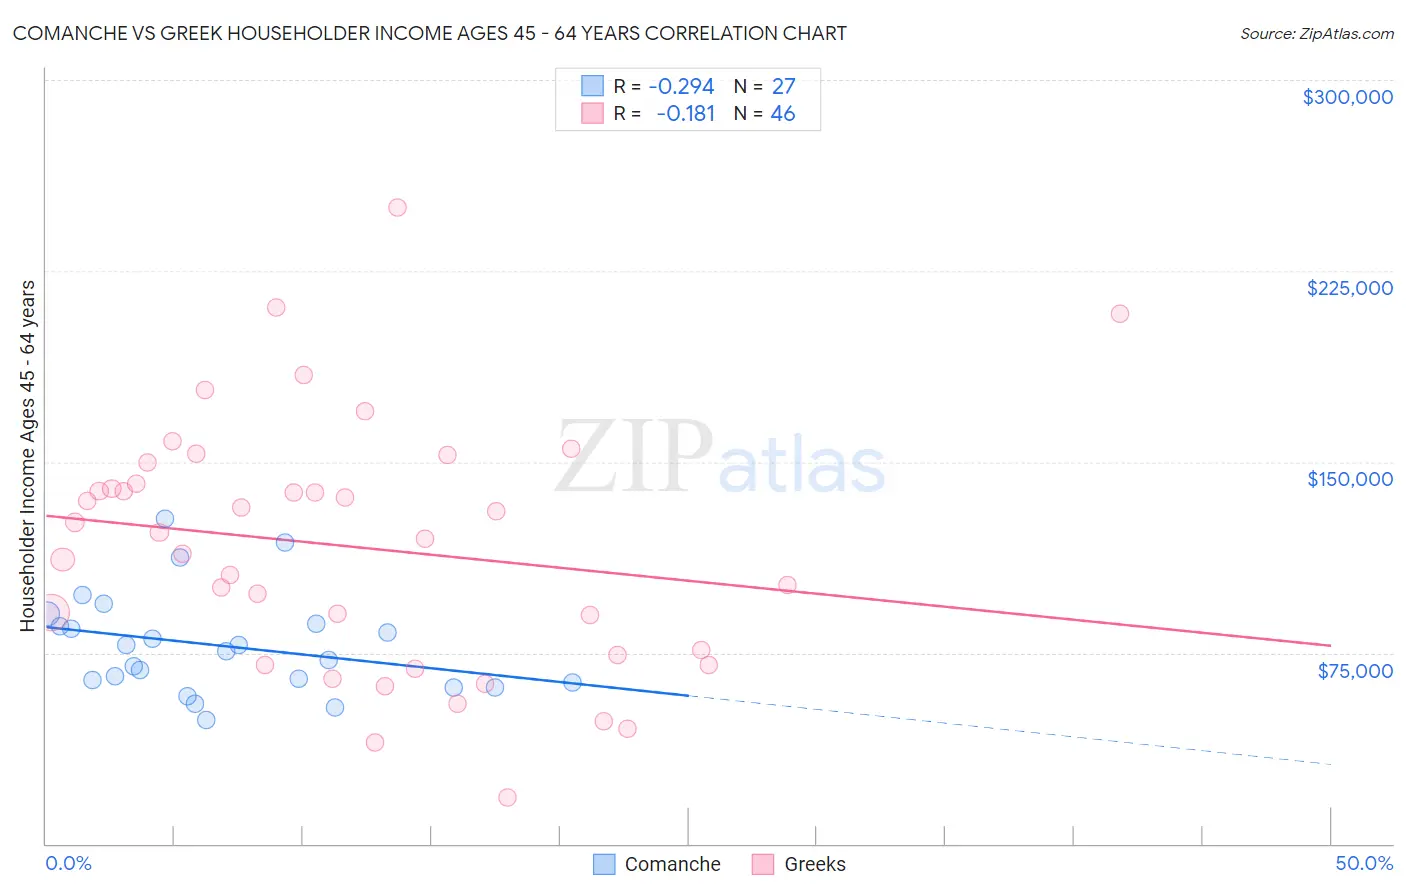 Comanche vs Greek Householder Income Ages 45 - 64 years